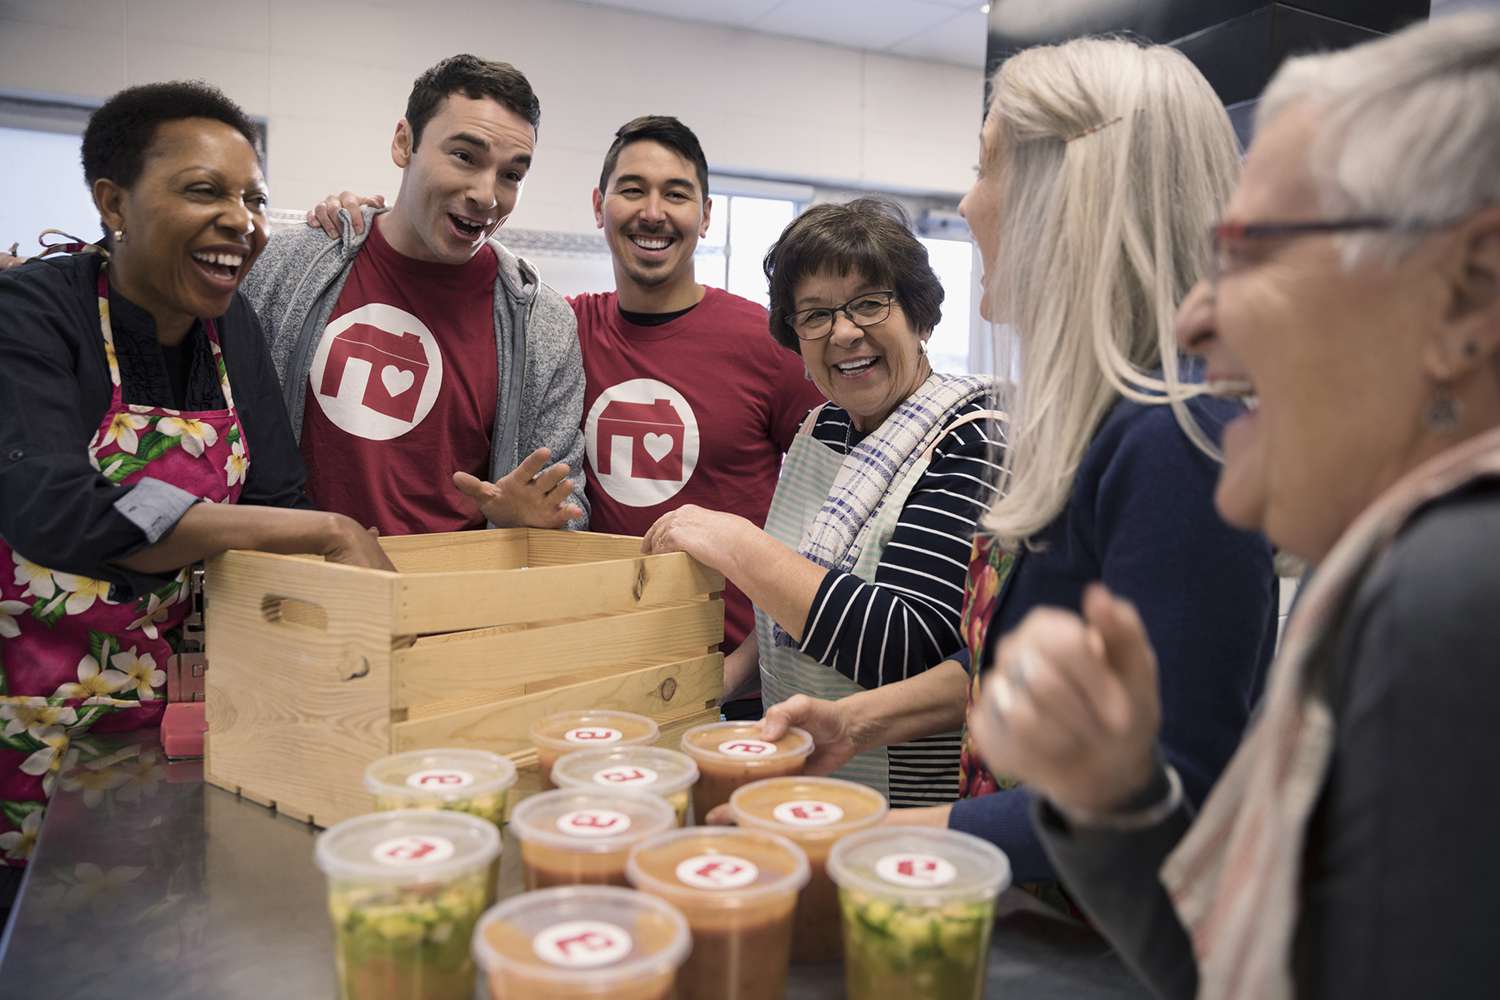 Playful Volunteers Packing Soup Containers in Crate in Soup Kitchen